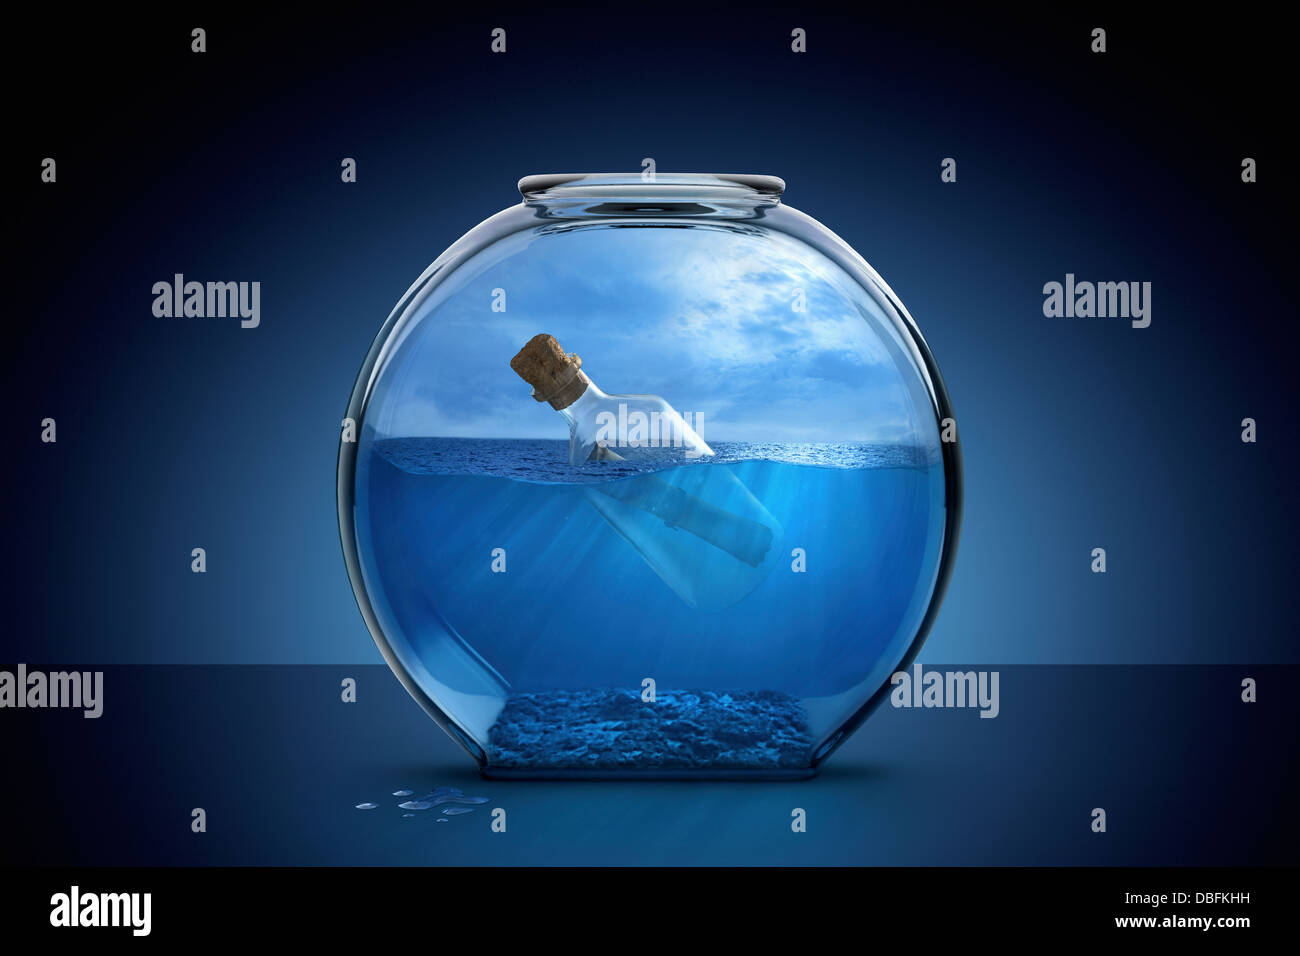 Message in a bottle in fishbowl Stock Photo